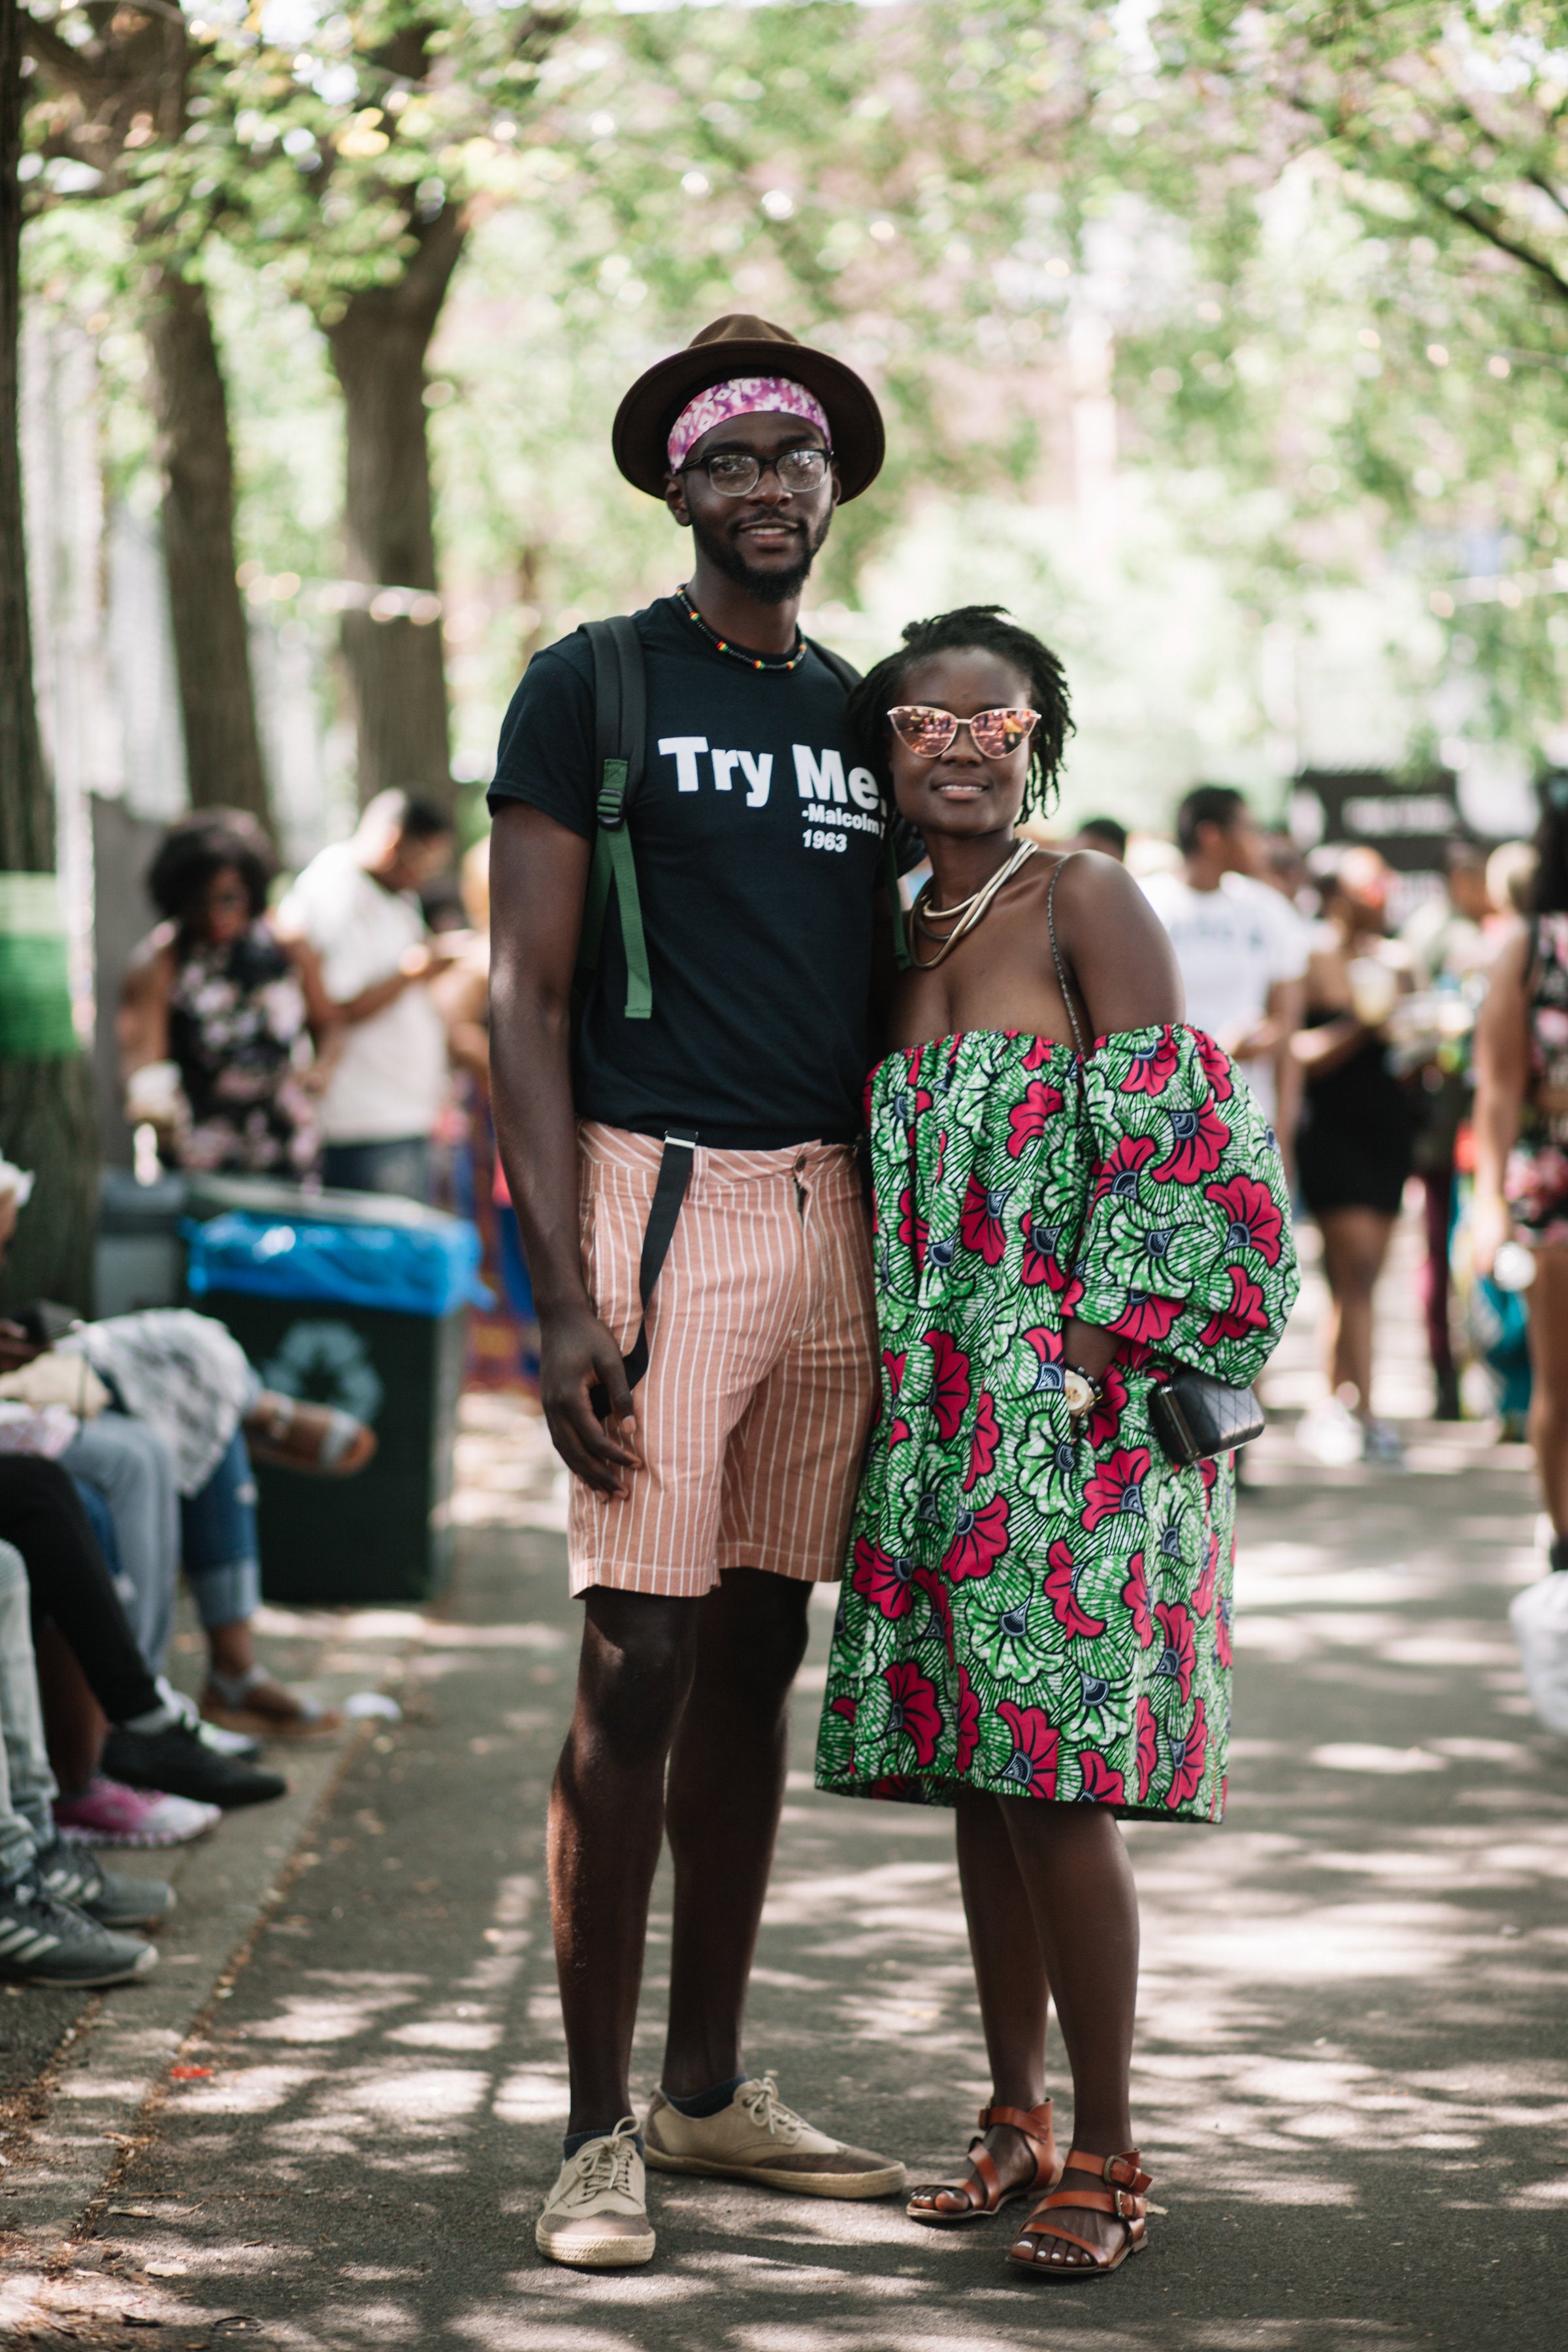 The Cutest Couples At AFROPUNK
